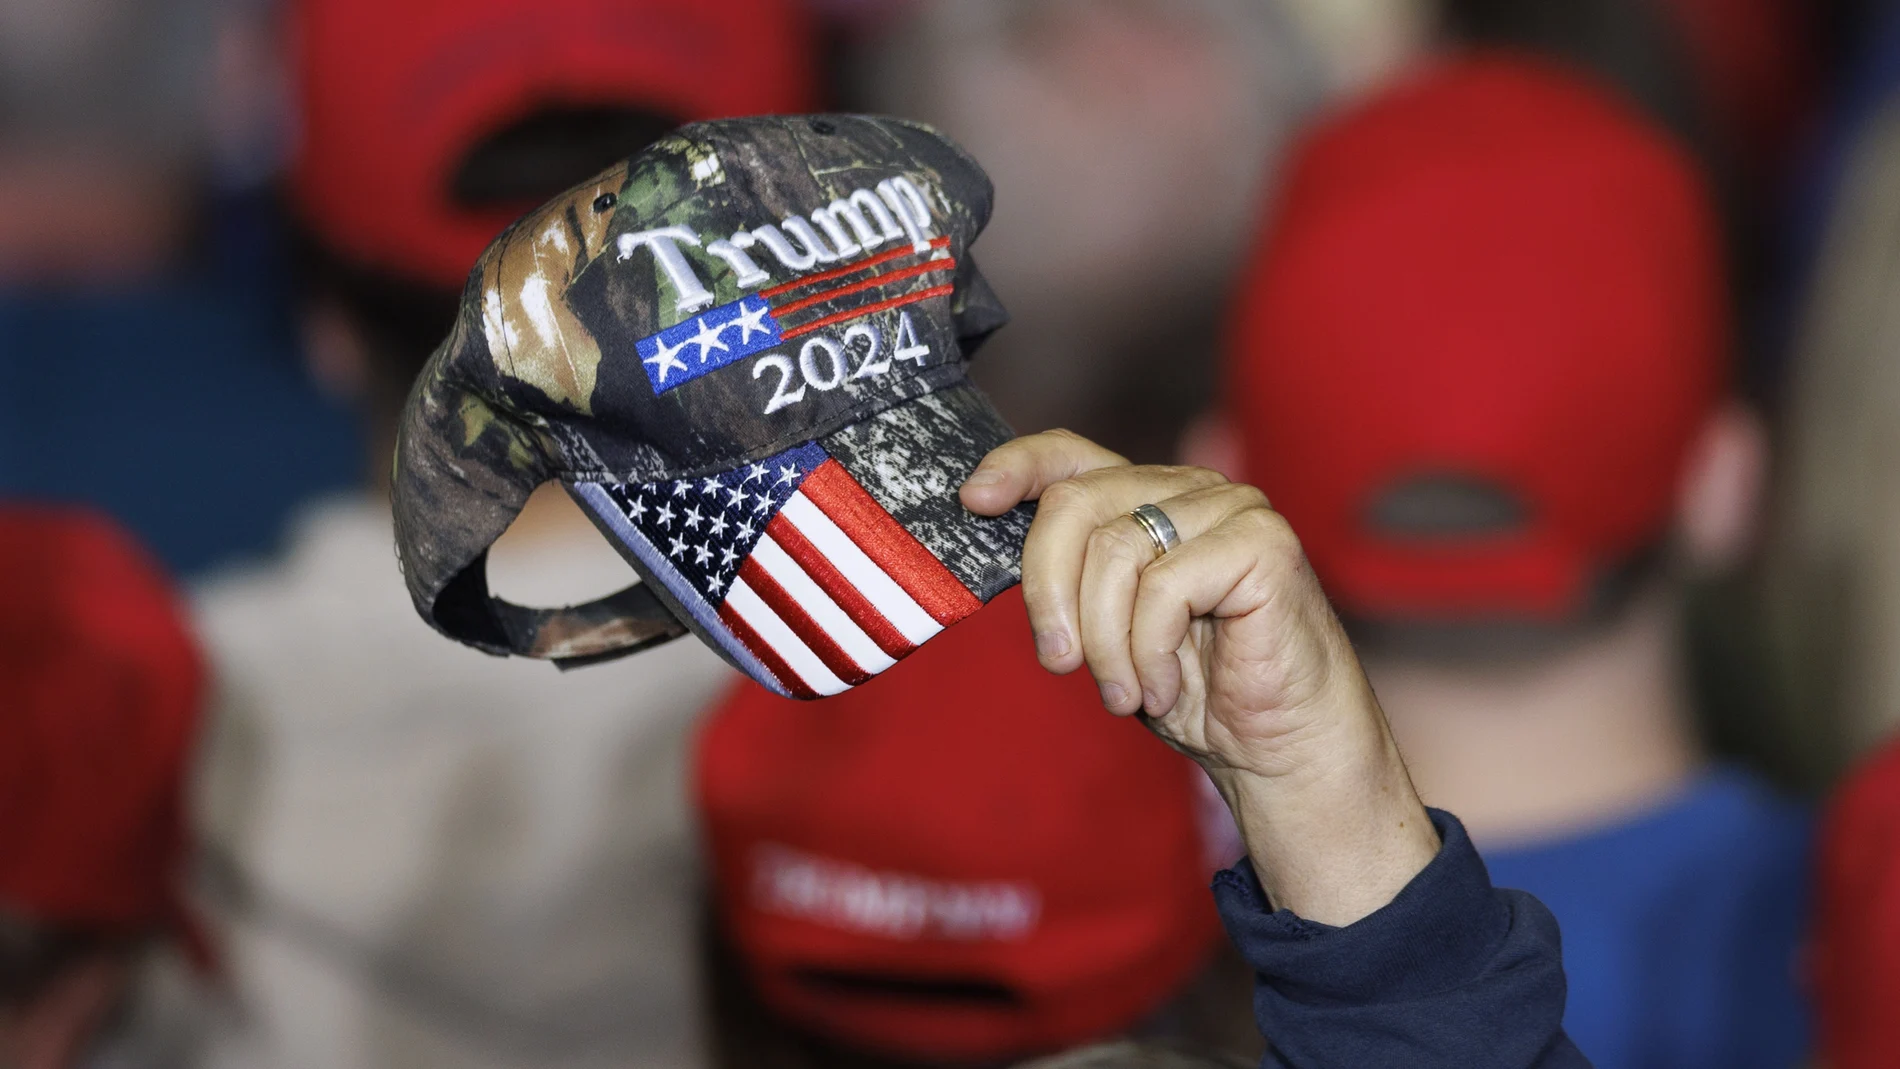  A supporter of former US president Donald Trump, waves a Trump 2024 campaign hat, before Trump addressed a crowd during a rally in Manchester, New Hampshire, USA